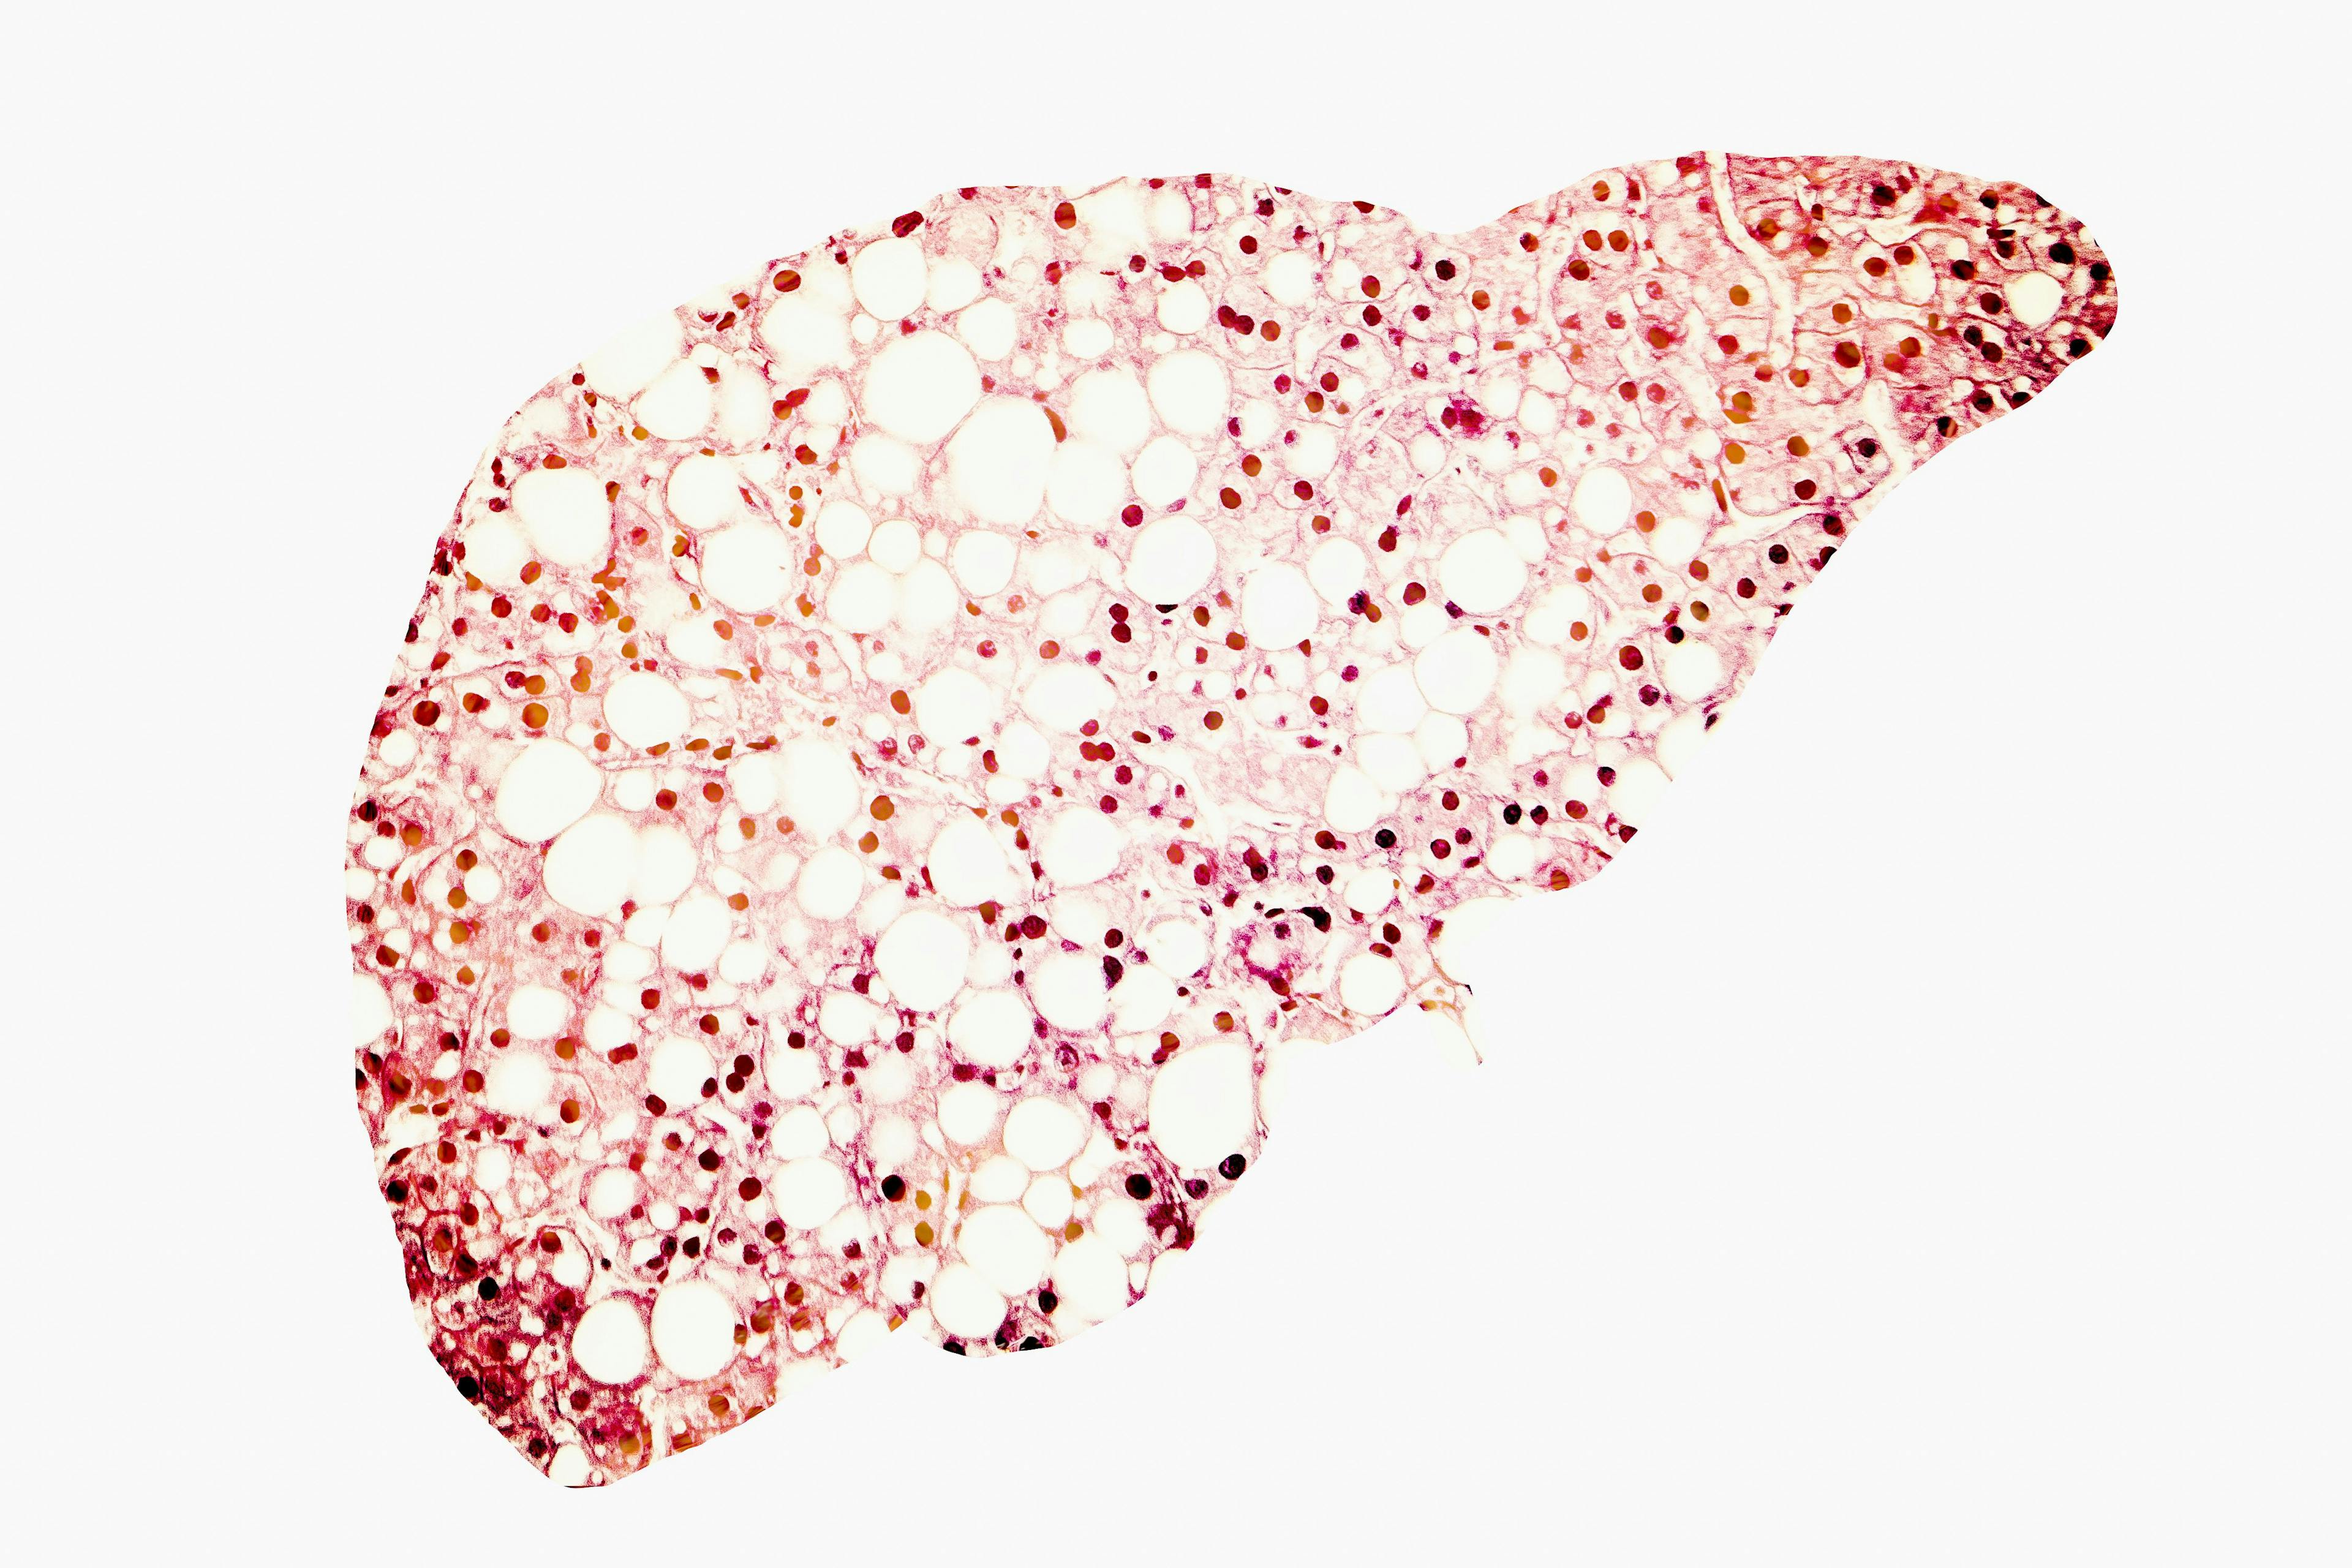 Use Liver Fibrosis Index for Hints About PAH Progression, Study Says